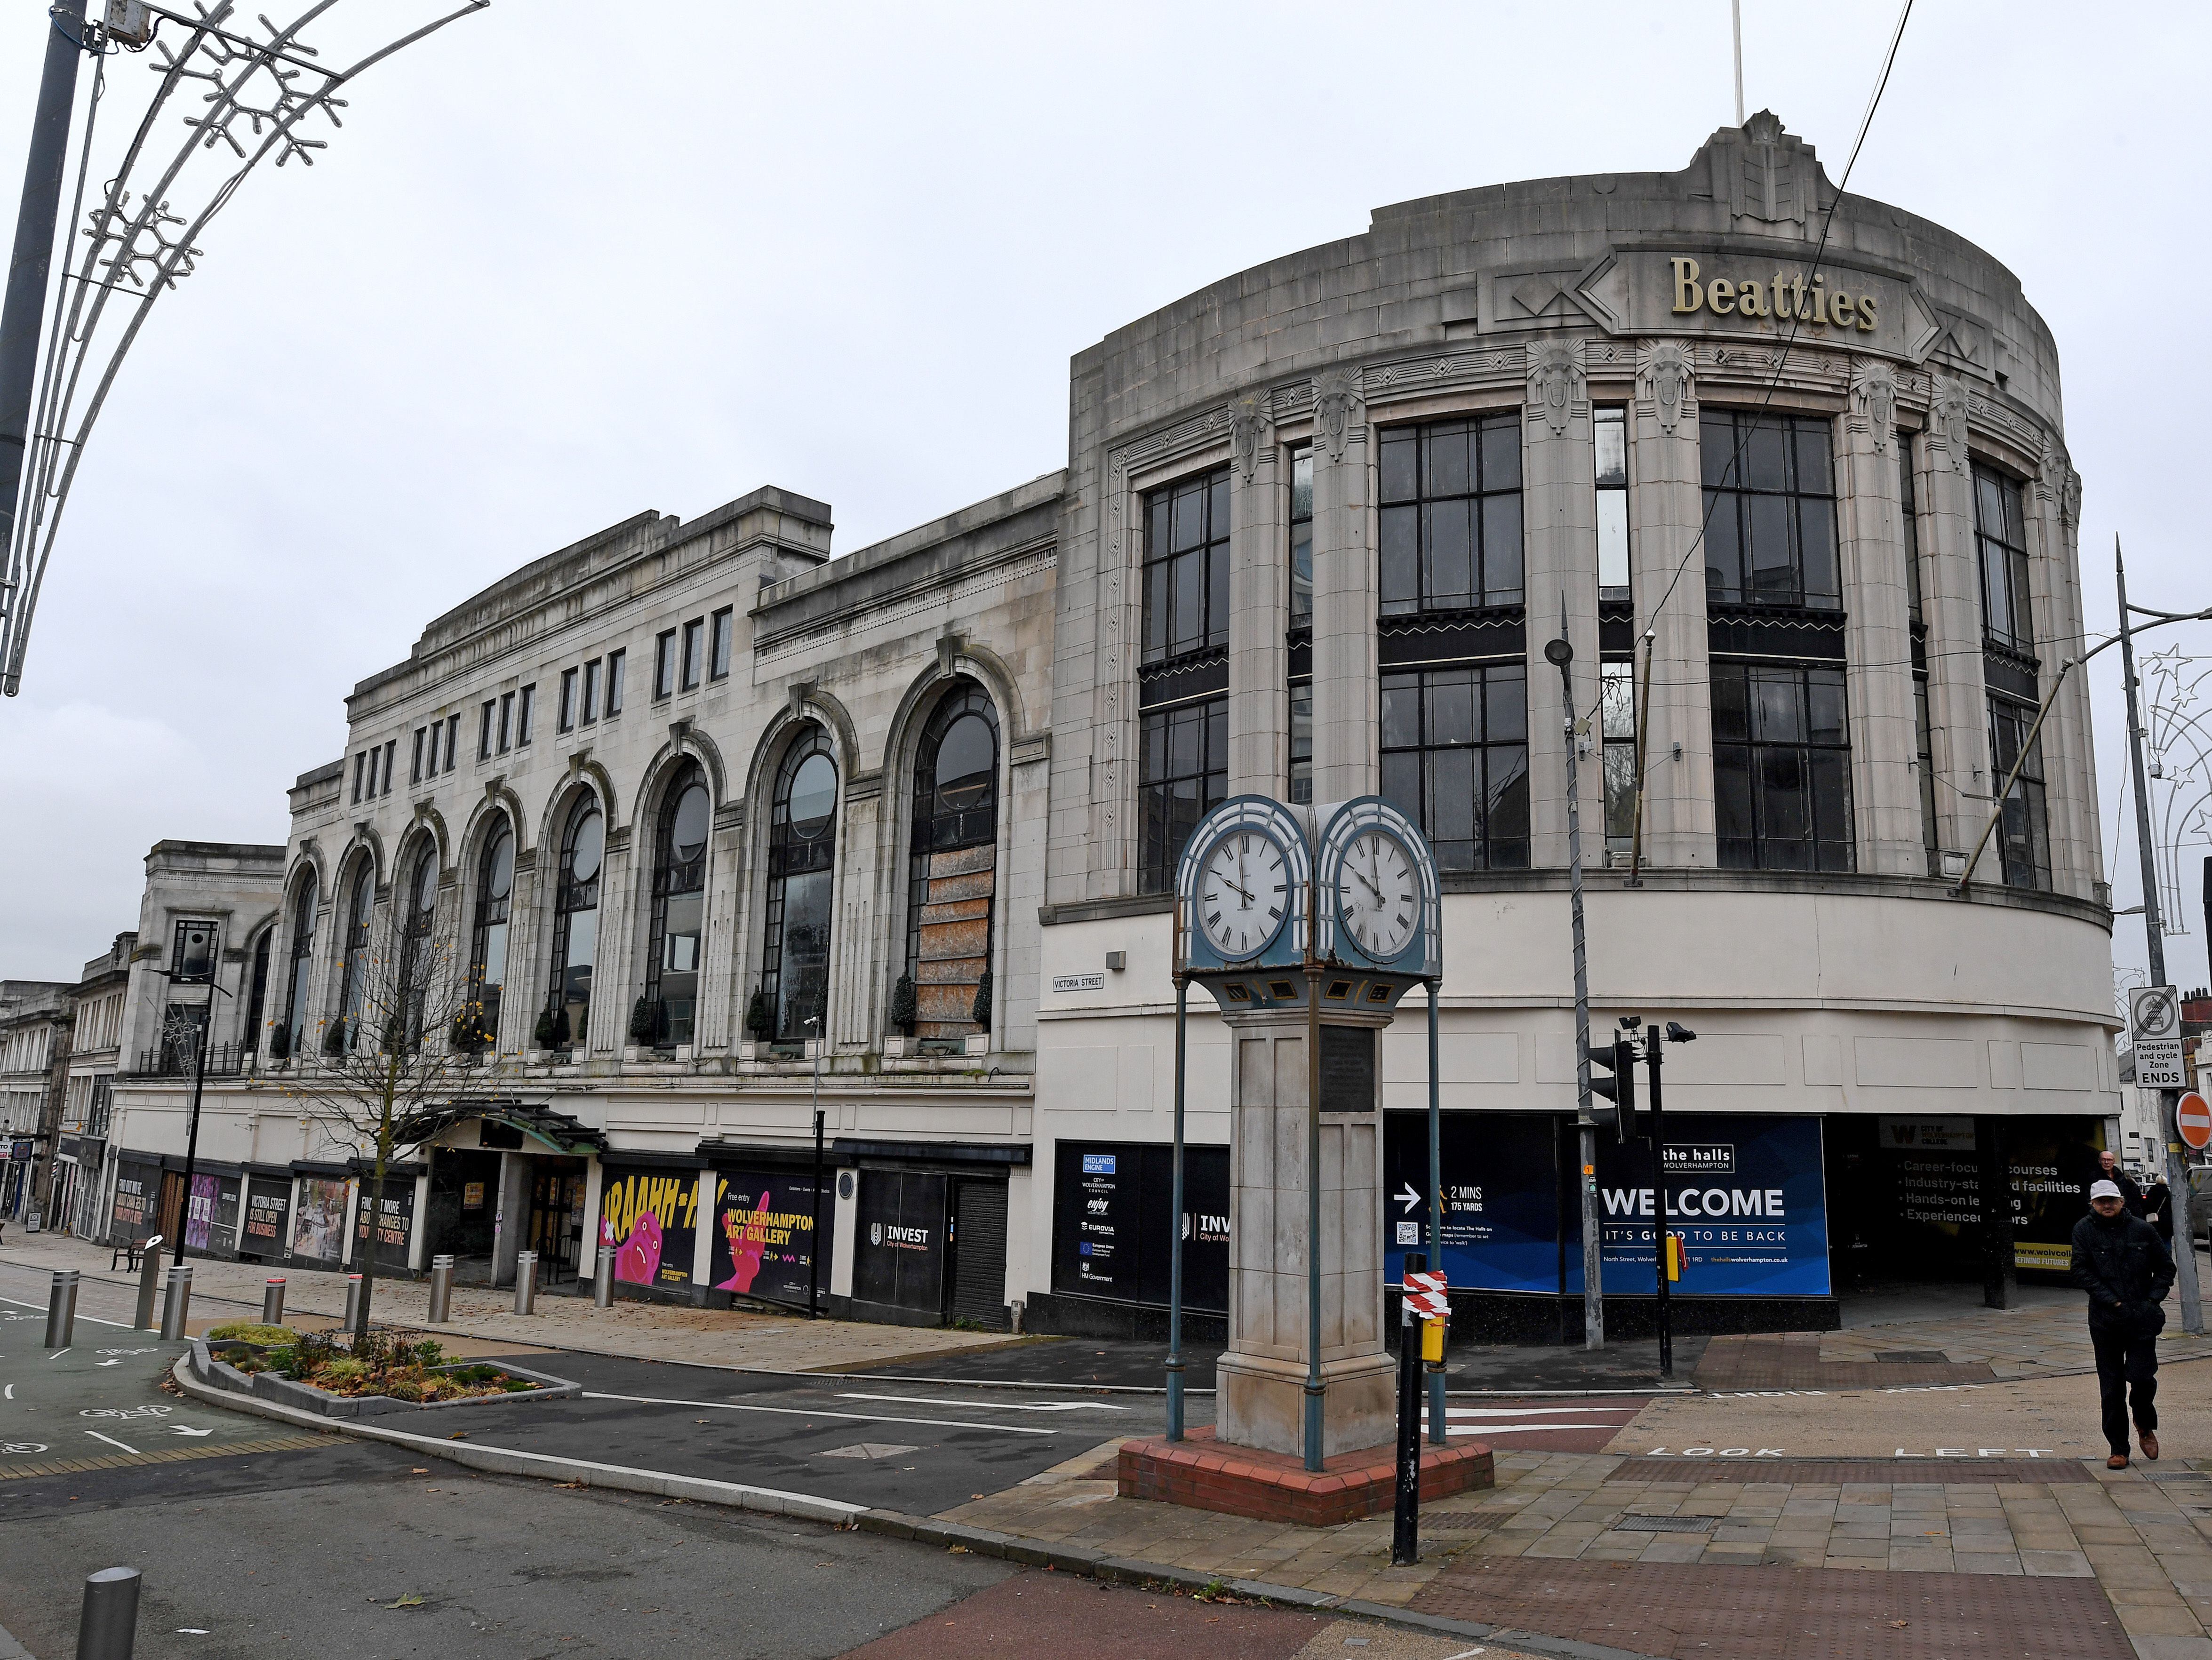 Former owner of famous Beatties building hit with £1 million bankruptcy petition